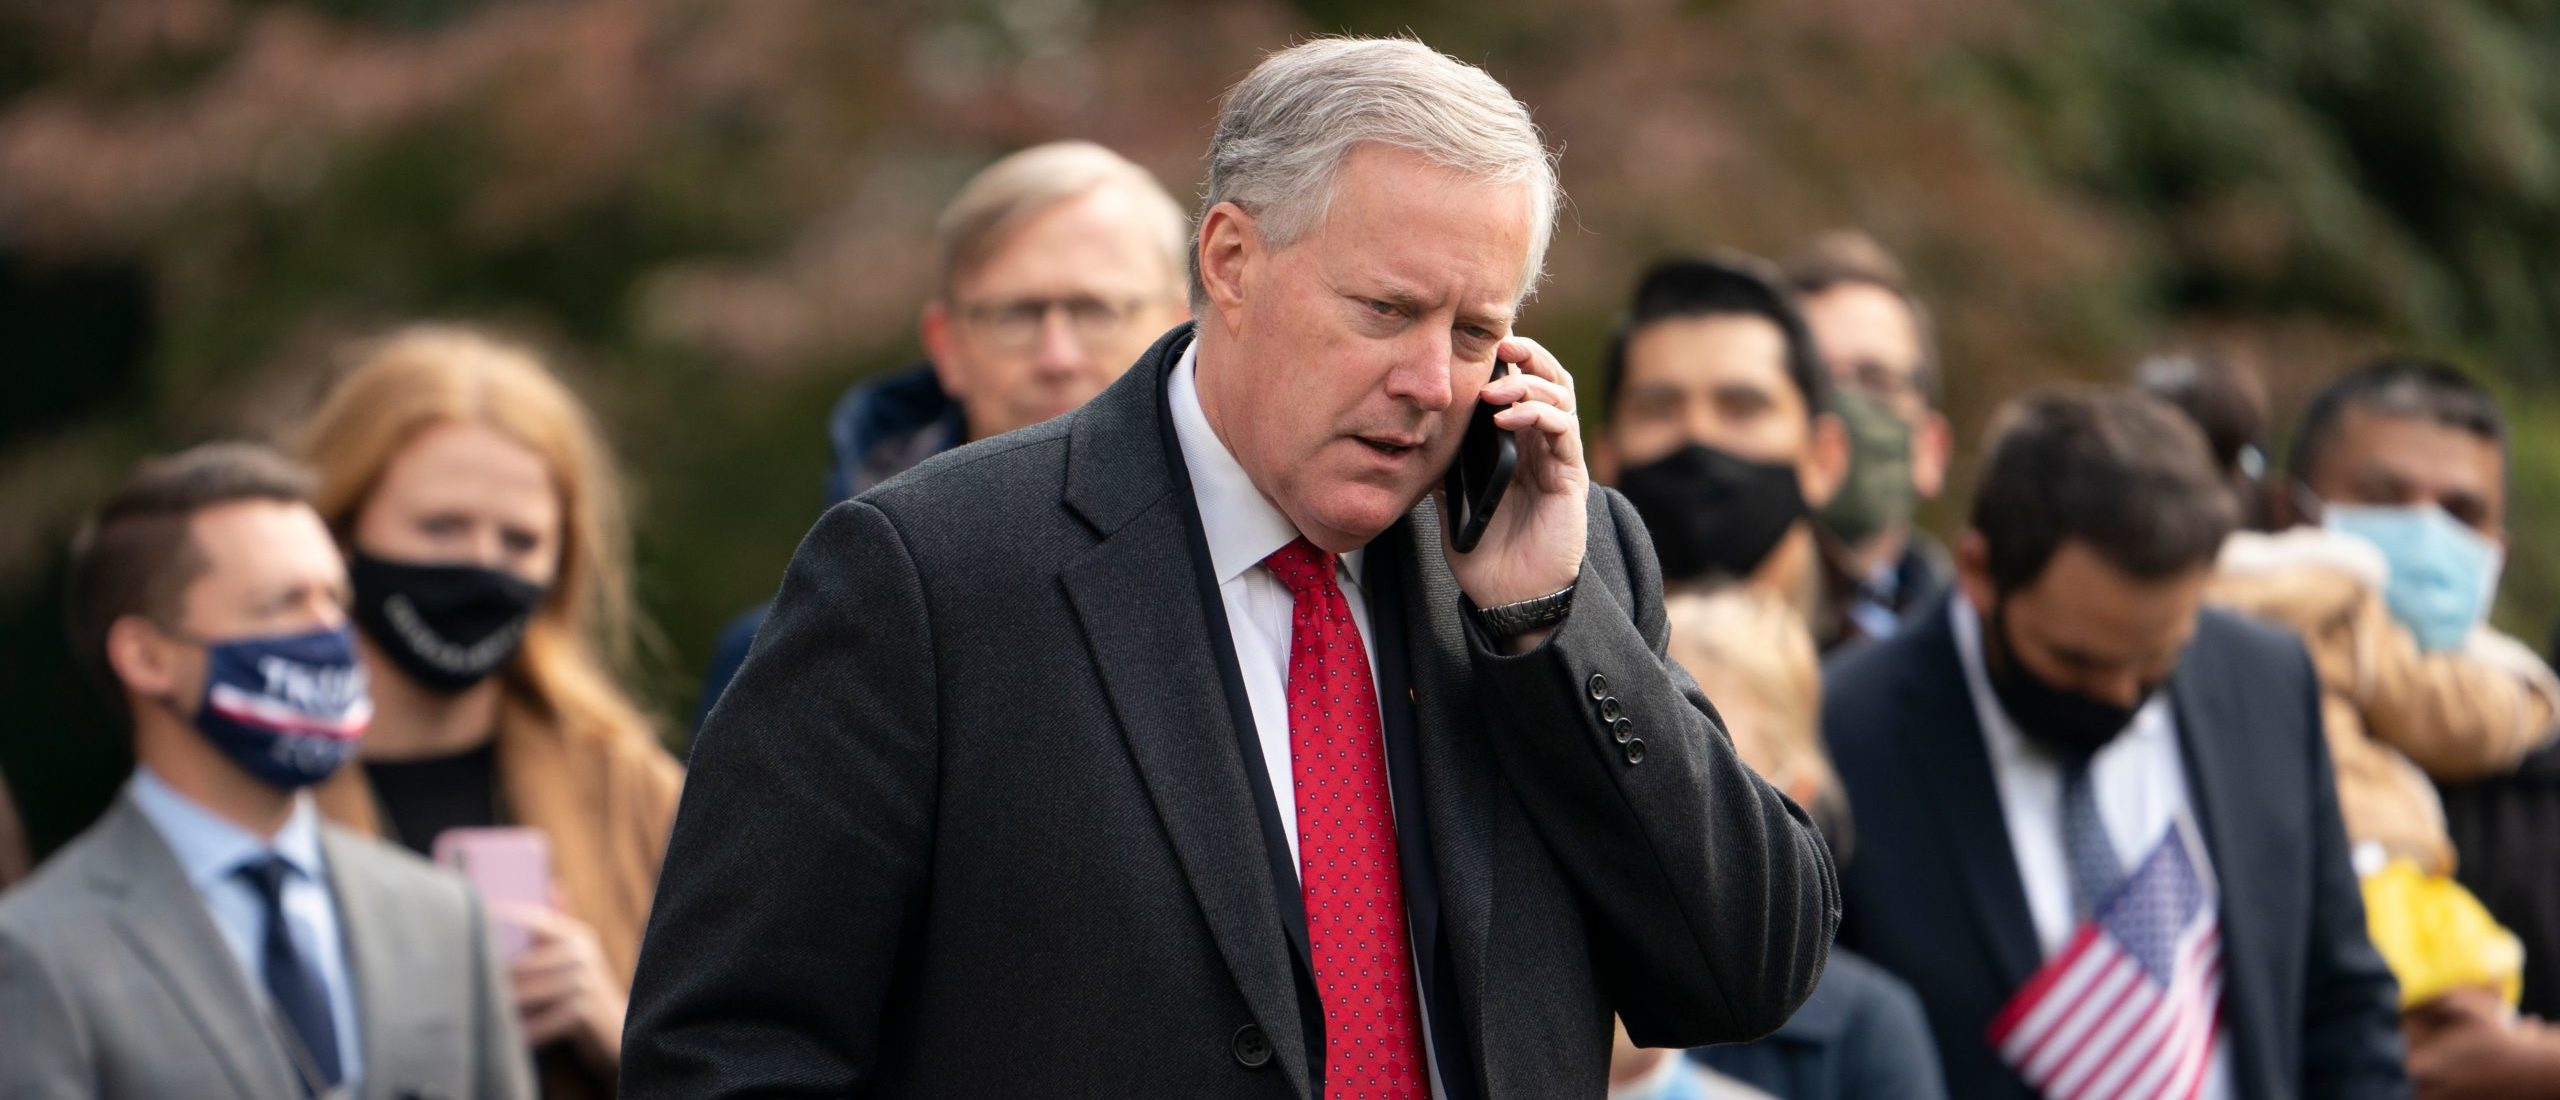 White House Chief of Staff Mark Meadows speaks on his phone as he waits for US President Donald Trump to depart the White House on October 30, 2020 in Washington, DC. - Trump travels to Michigan, Wisconsin and Minnesota for campaign rallies. (Photo by ANDREW CABALLERO-REYNOLDS/AFP via Getty Images)